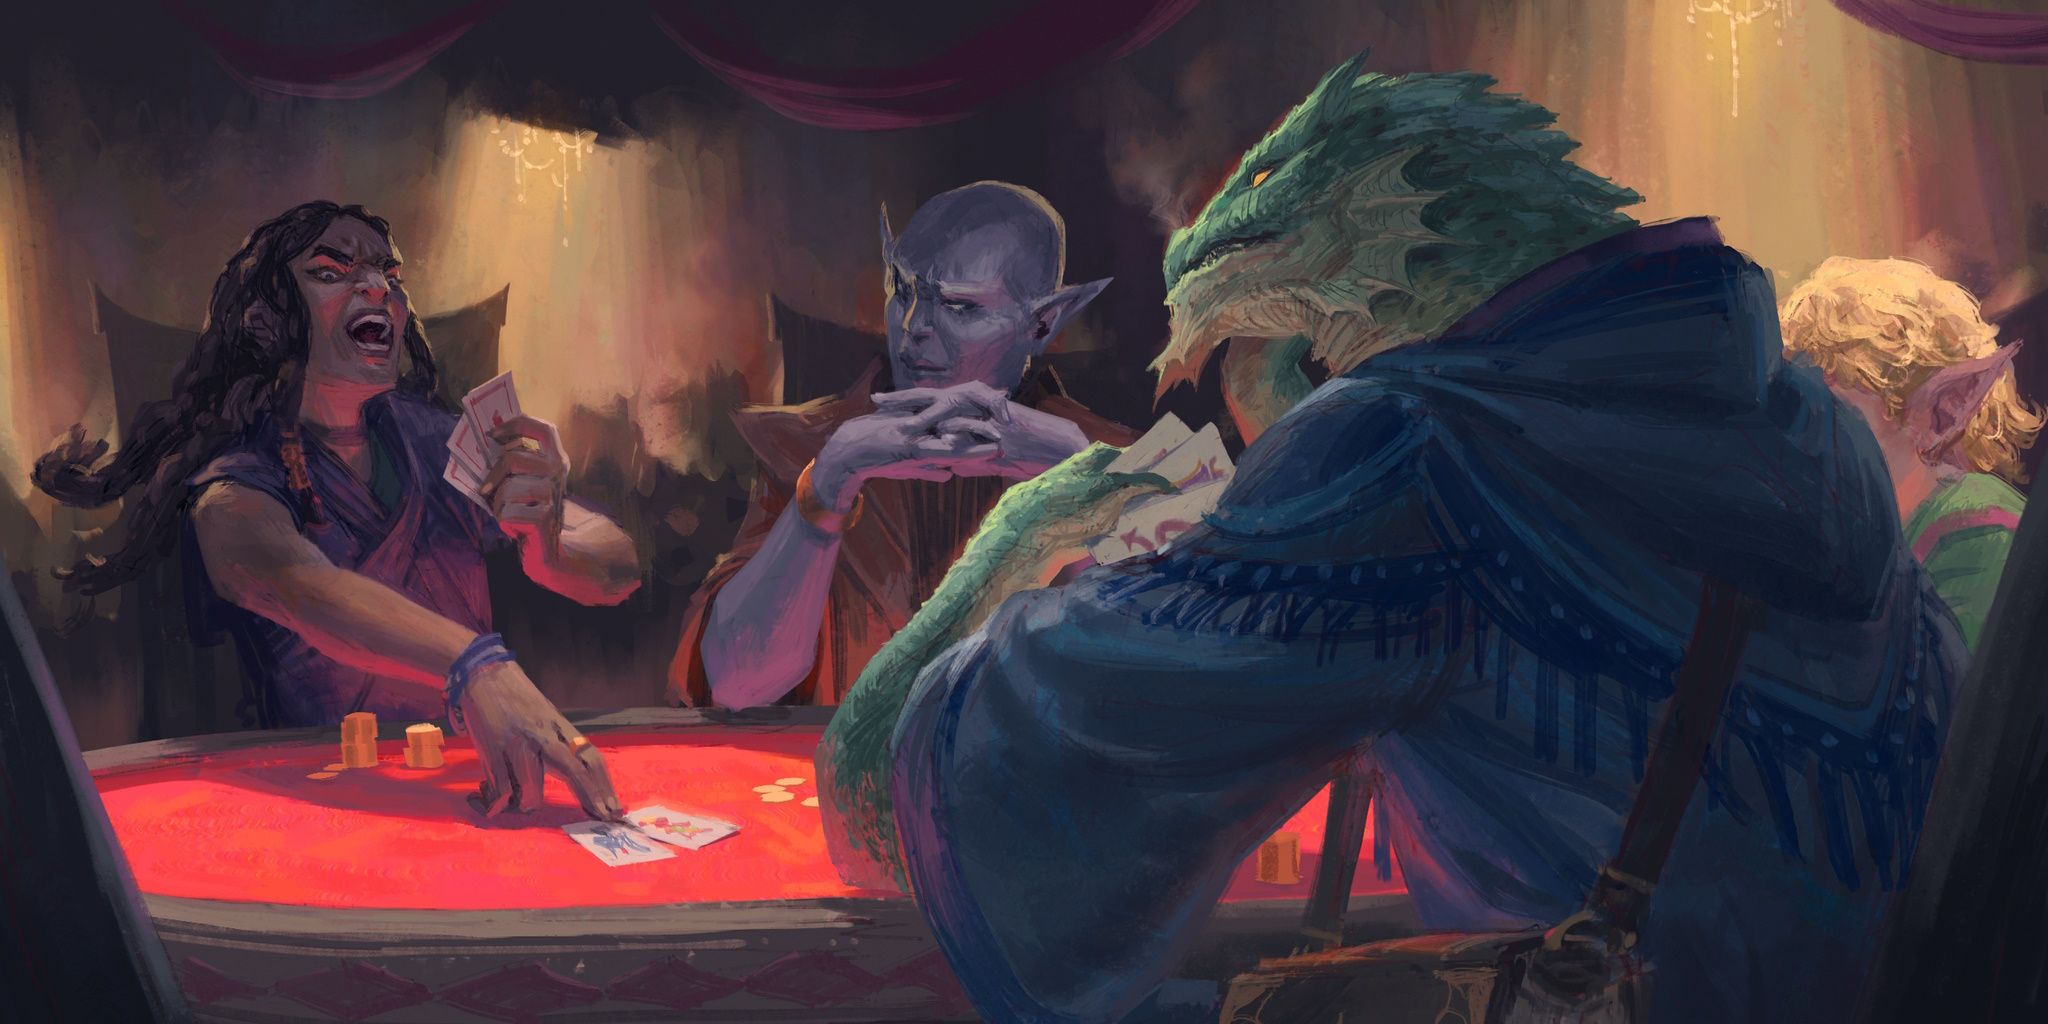 Keys From The Golden Vault official art showing the Nine Hells casino with three characters playing cards around a table